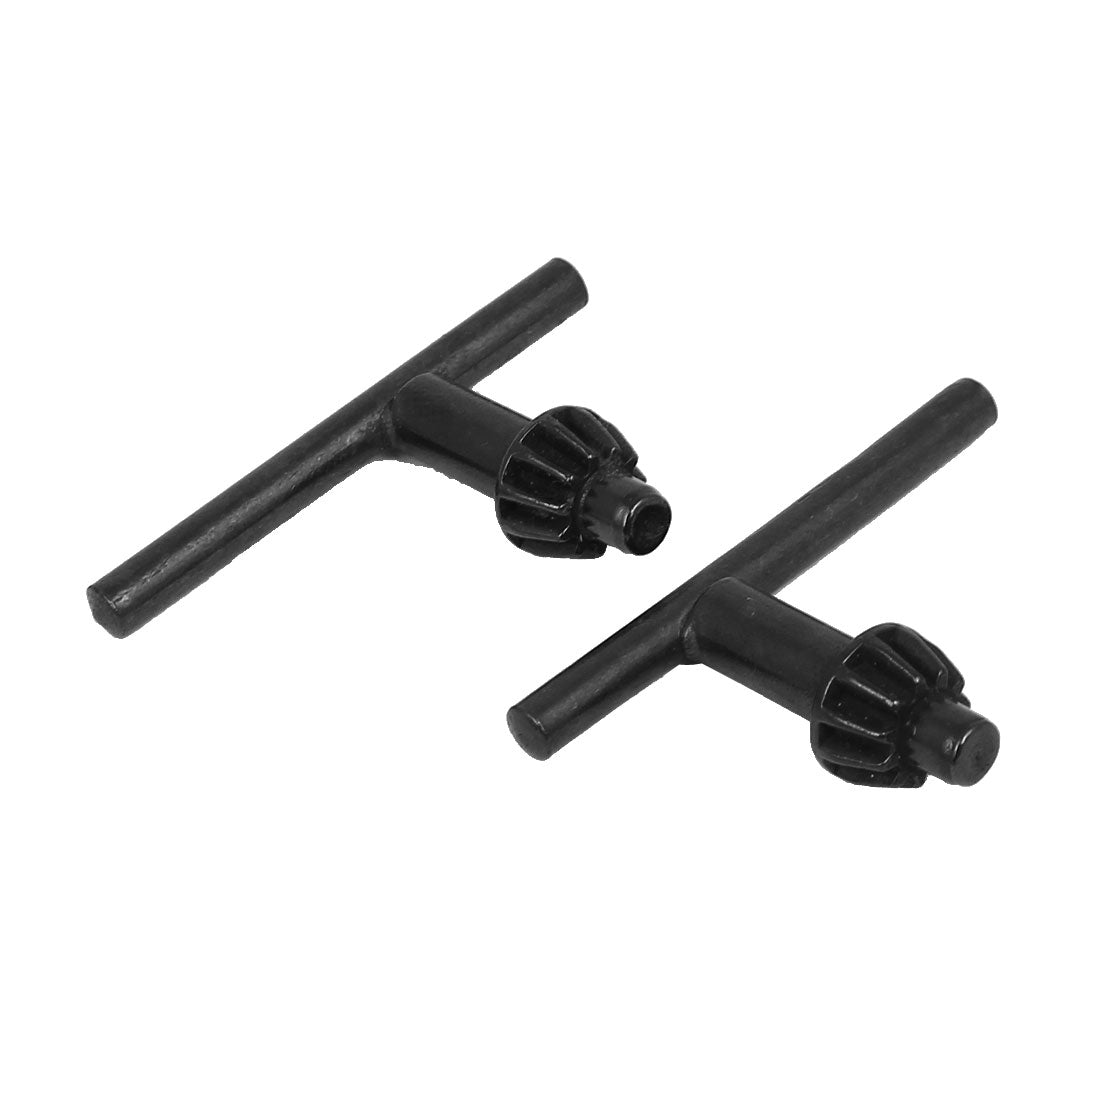 uxcell Uxcell Drill Chuck Key 6mm Key 13mm Gear for Impact Driver Drills Tools Wrench 2pcs